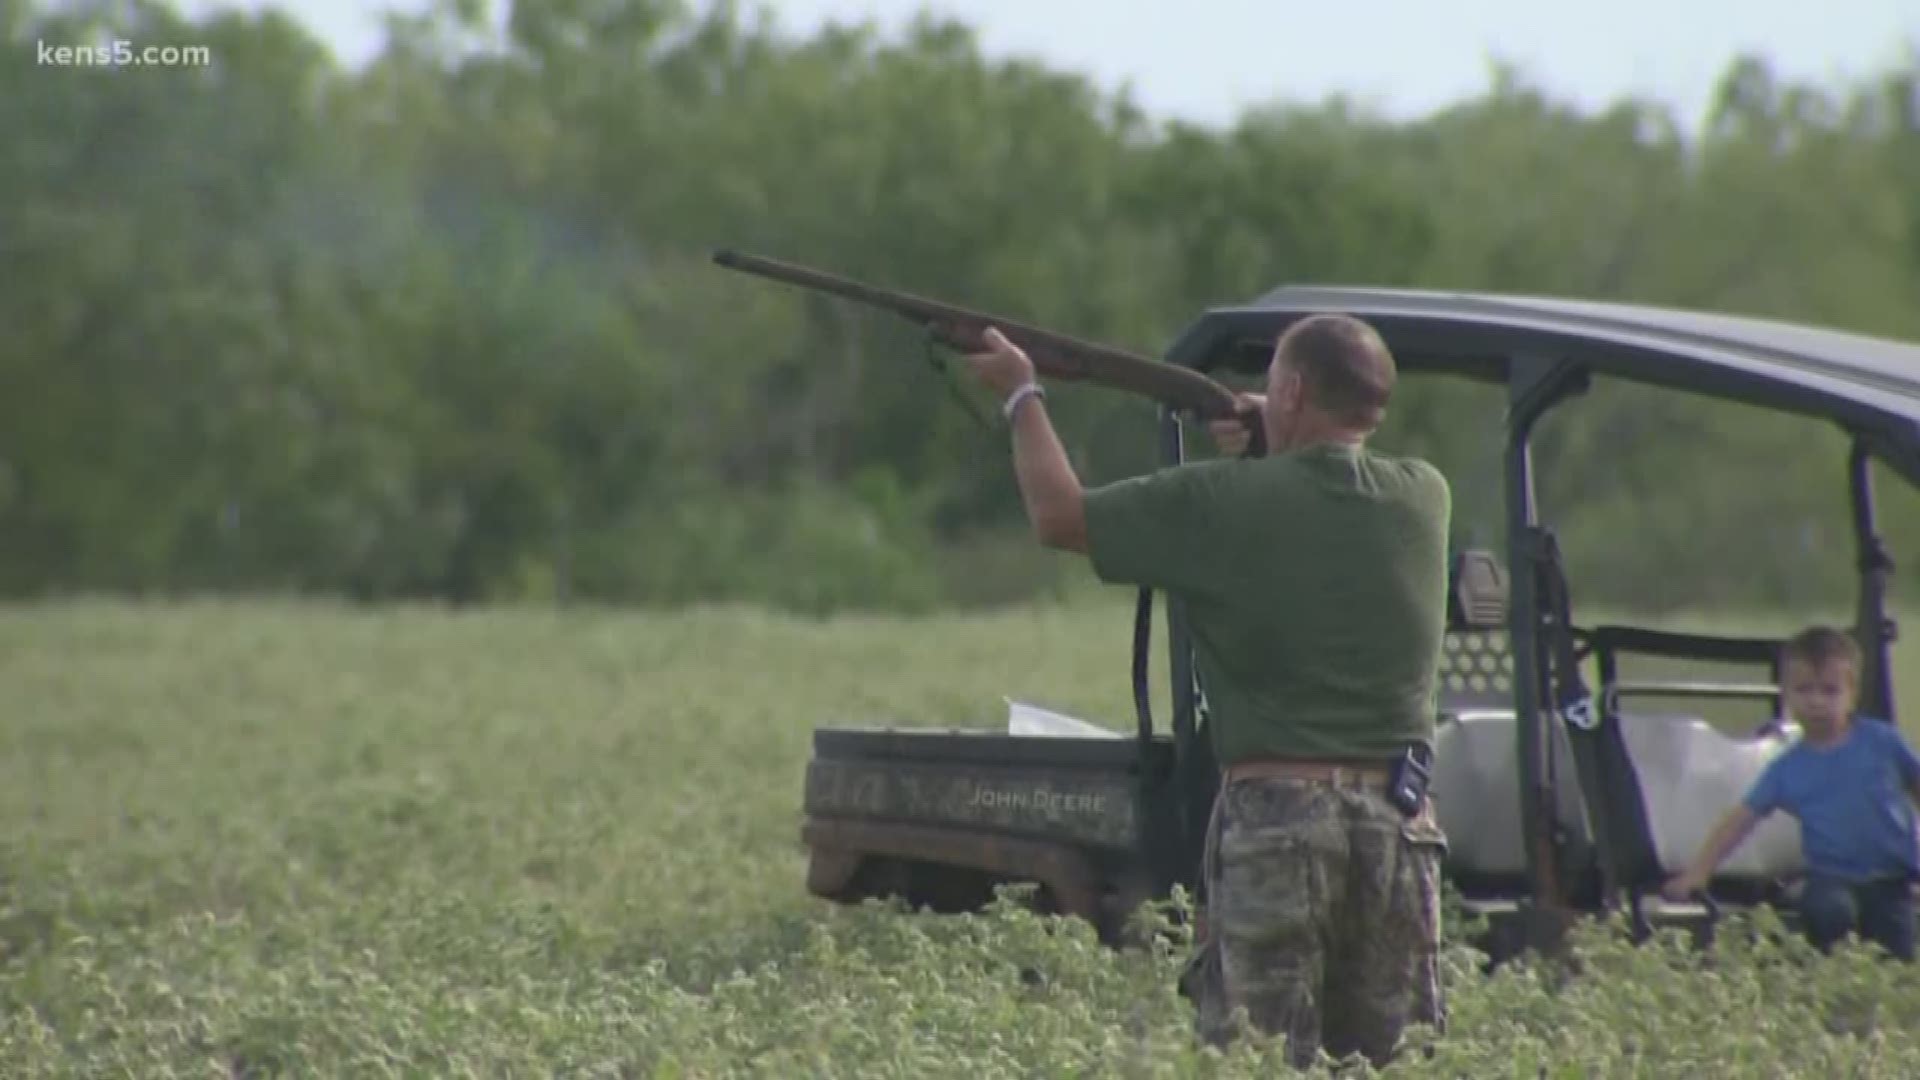 It you hunt at all, you've probably already been or at least know...it's dove season. It is one of the most exciting seasons, because you shoot, most times, a lot. And that's what we're doing on this week's Texas Outdoors.